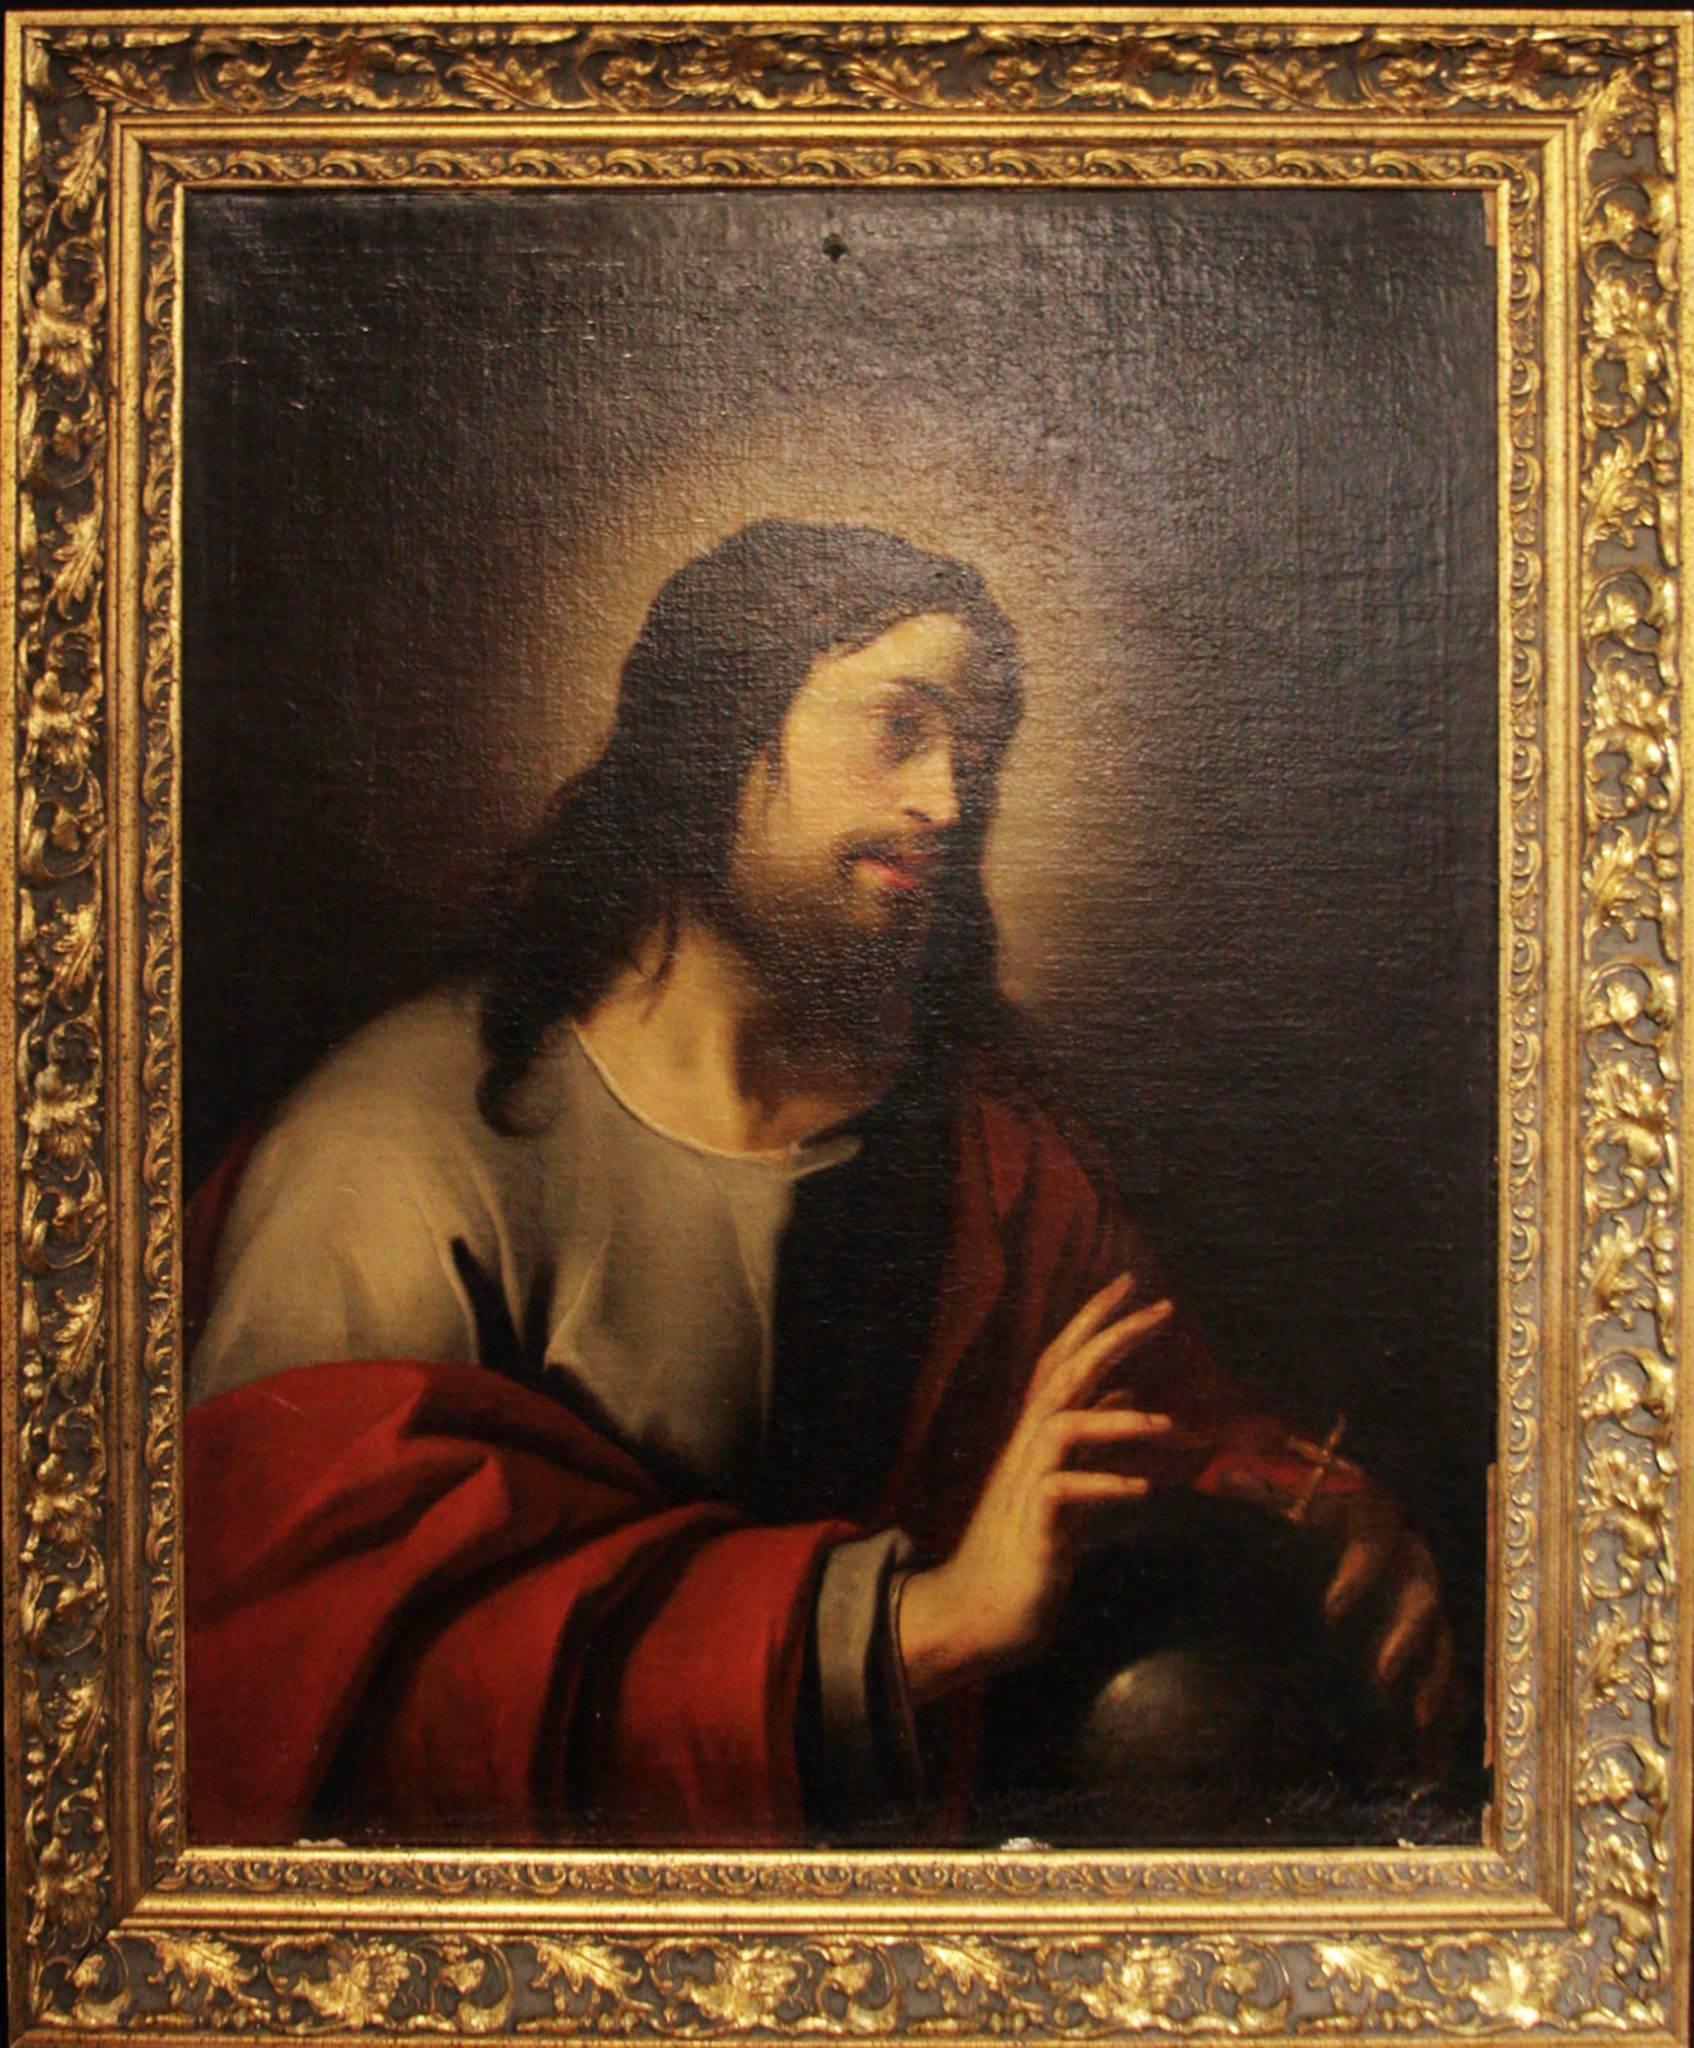 Salvator Mundi (Savior of the World) is believed to be a late 17th century or early 18th century copy of a lost painting titled Le Christ Bénissant by French baroque painter Jacques Blanchard (Jacques Blanchart).  The painting in the Worthington